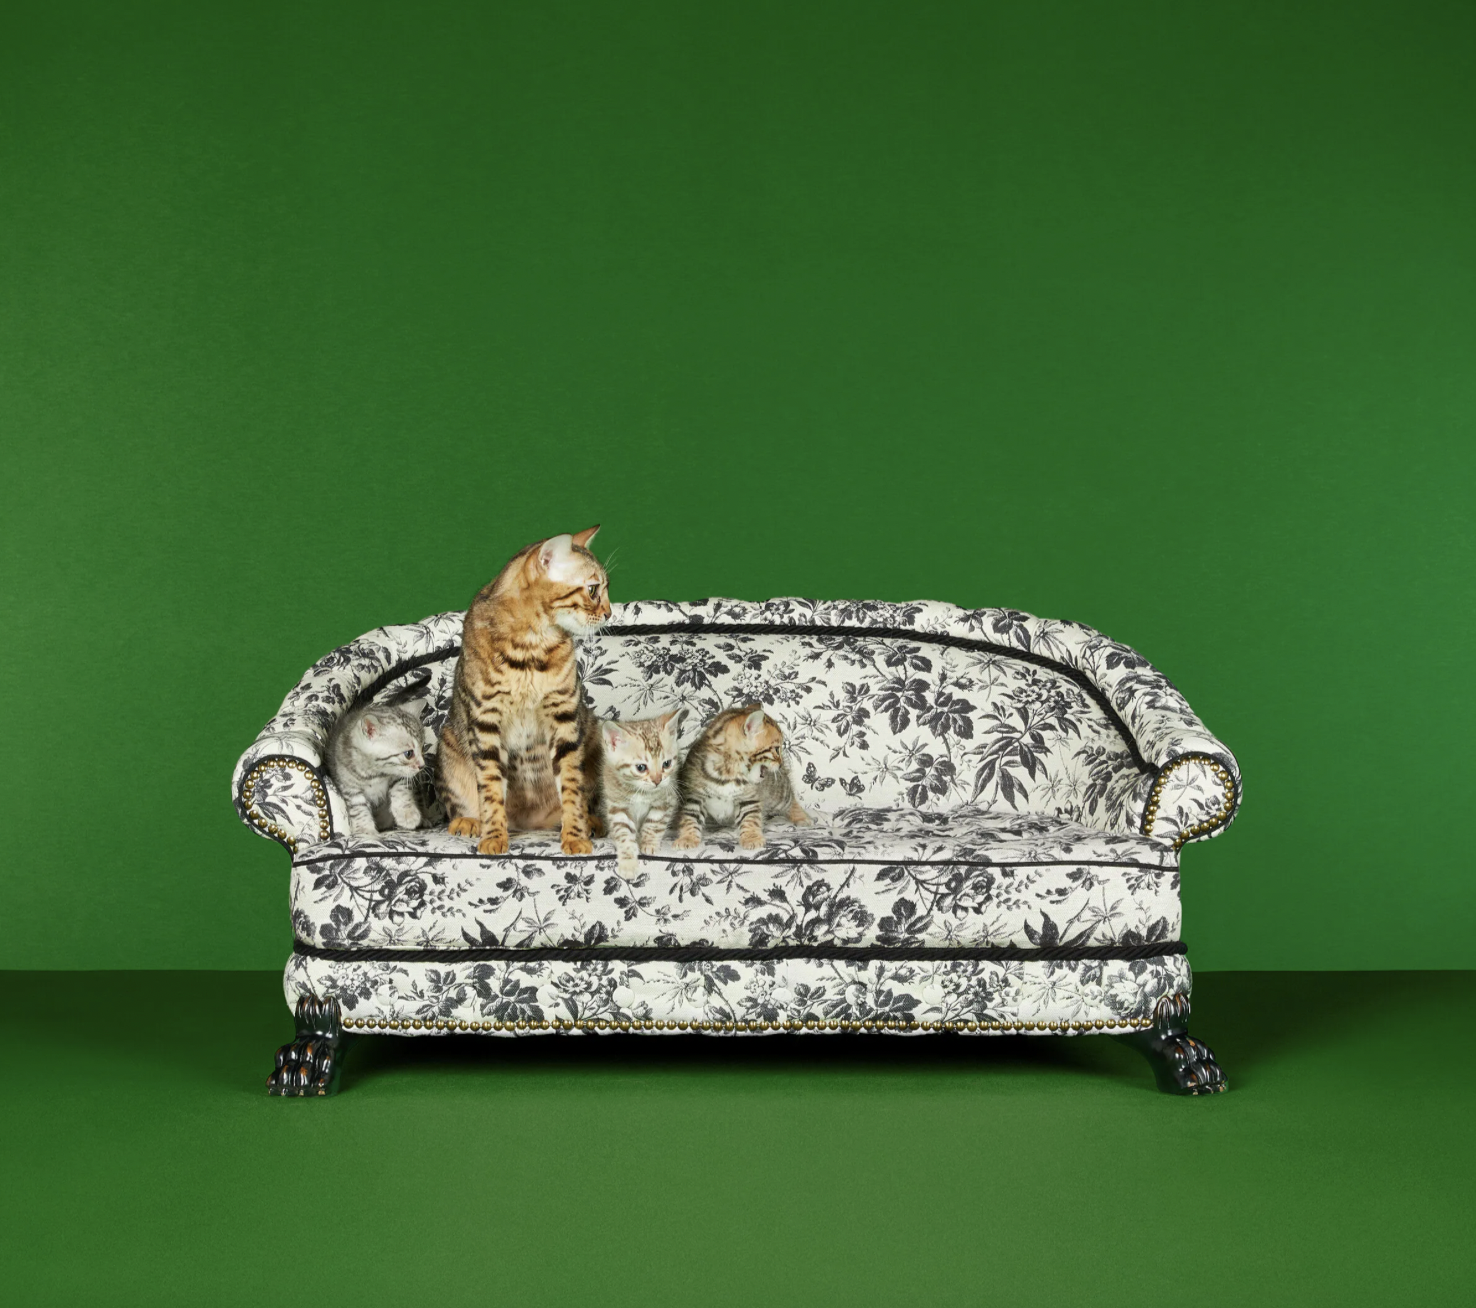 Stylish pet homeware that'll actually look good in your home